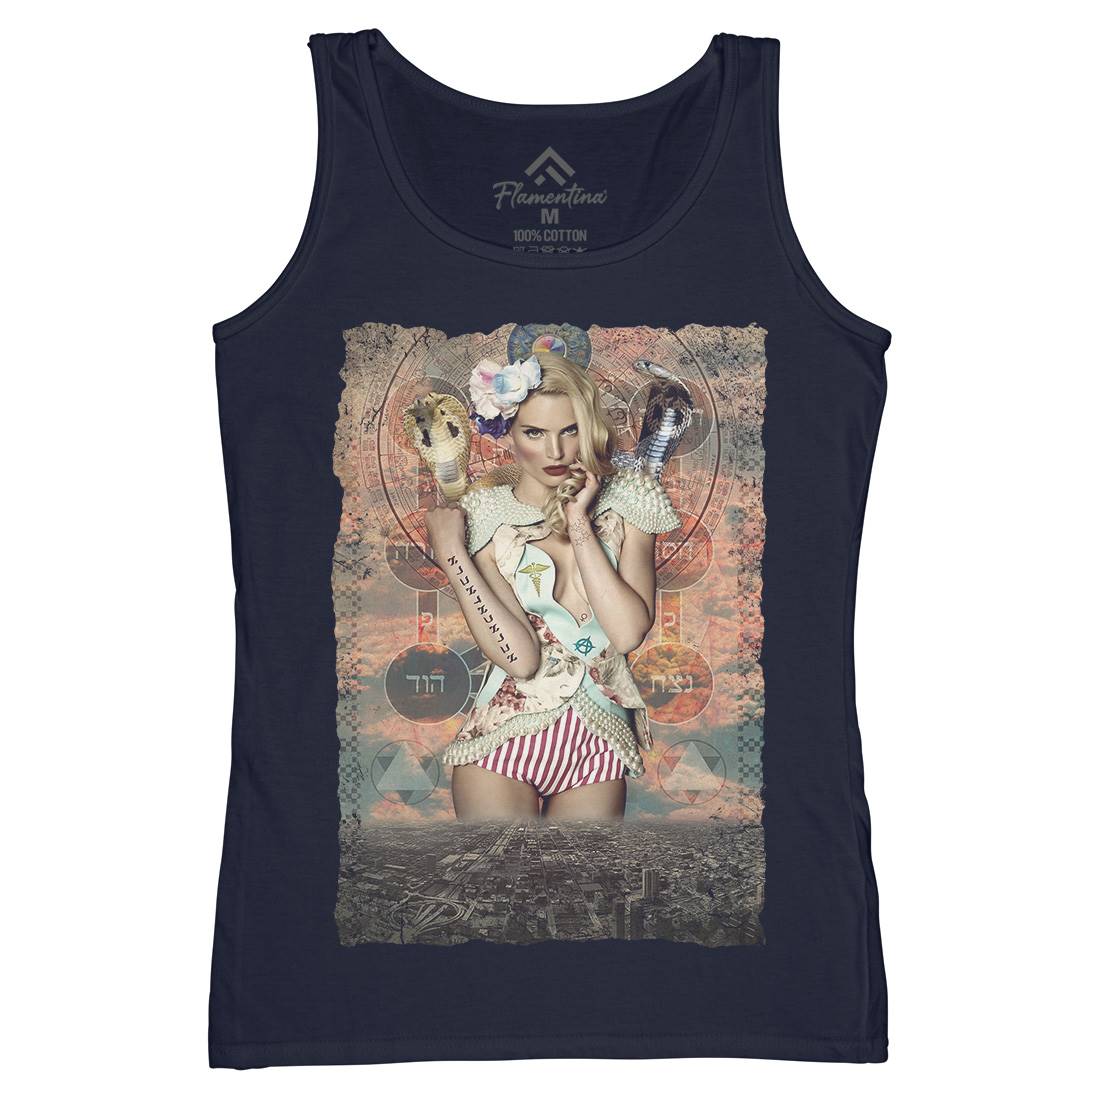 See Her Everywhere Womens Organic Tank Top Vest Art A903